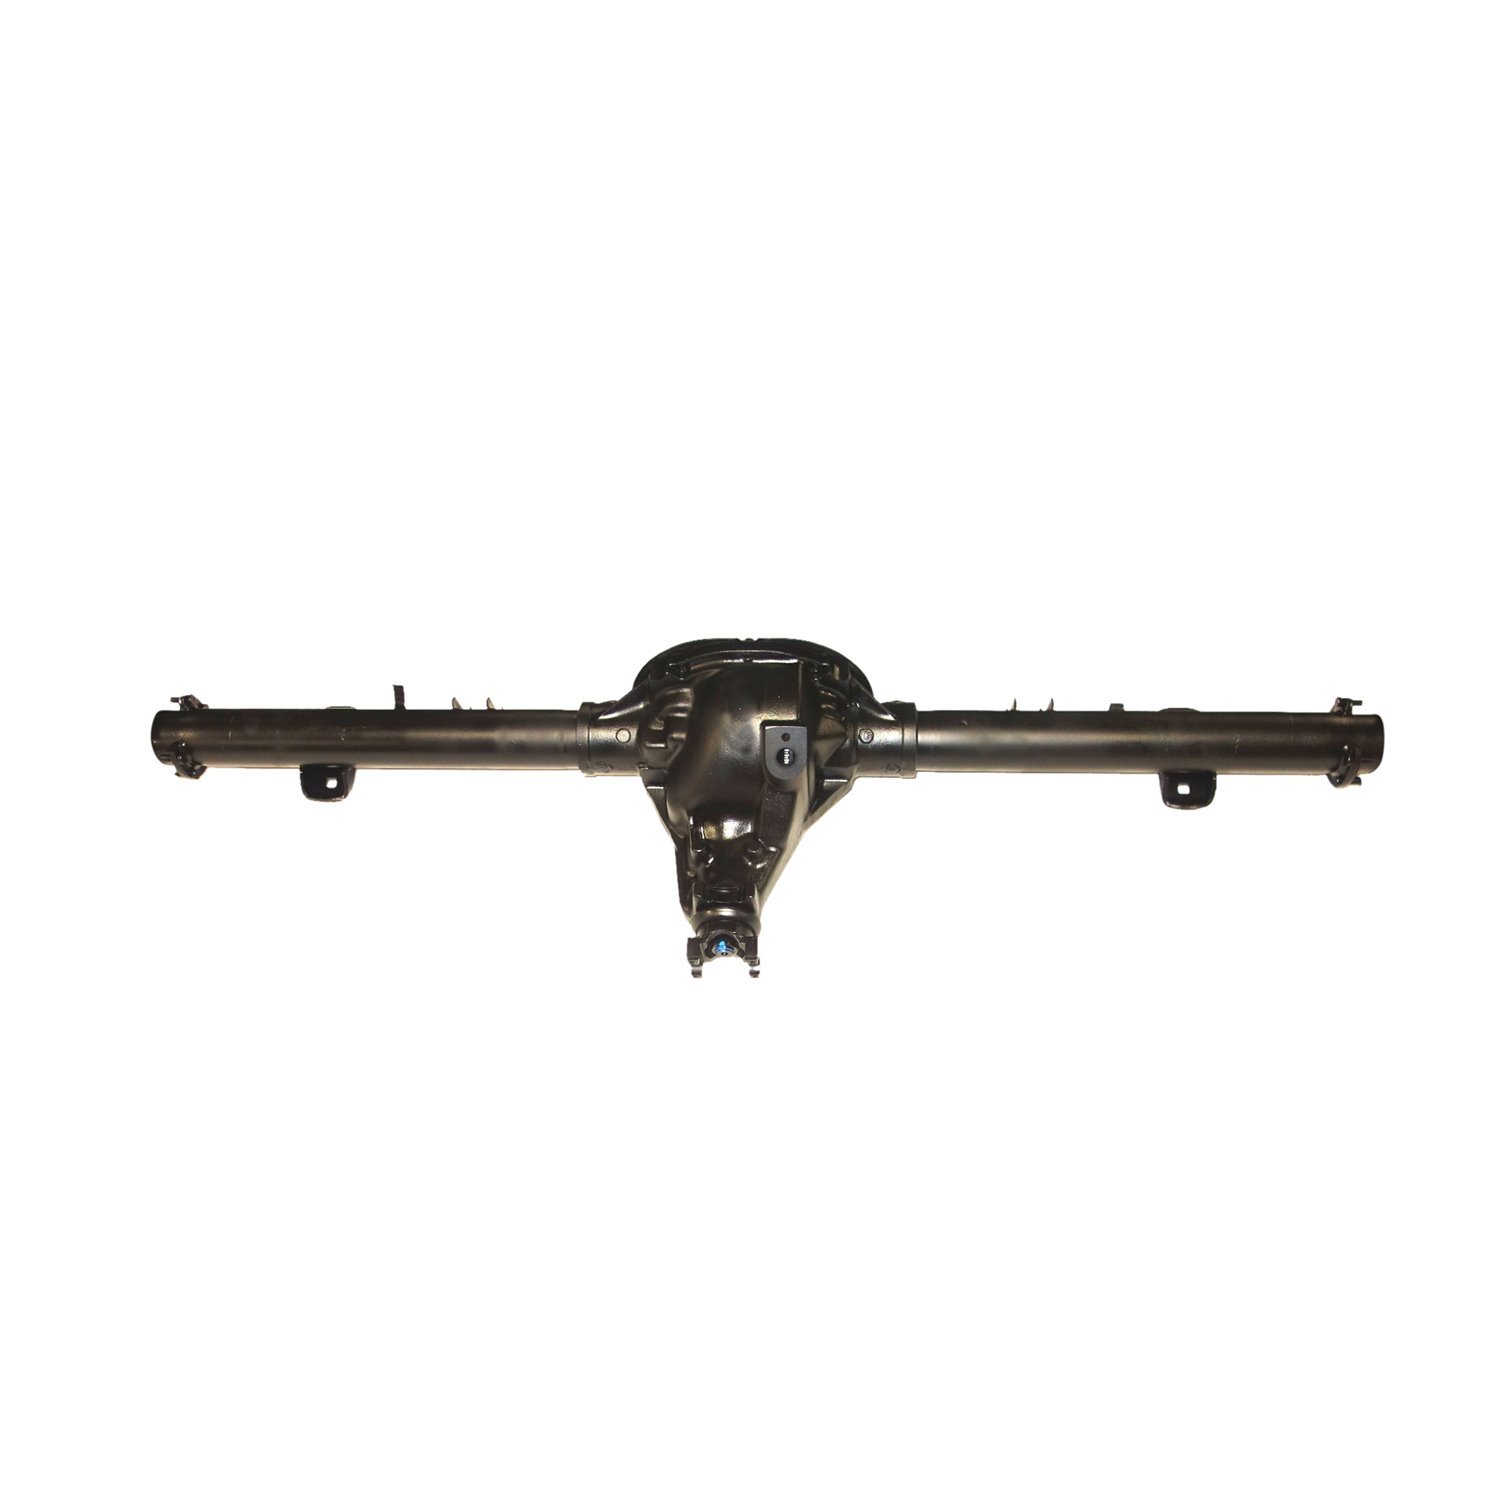 Remanufactured Axle Assy for Chy 8.25" 89-93 Dodge 1/2 Ton, D100, D150, 3.21 , 2wd w/ ABS